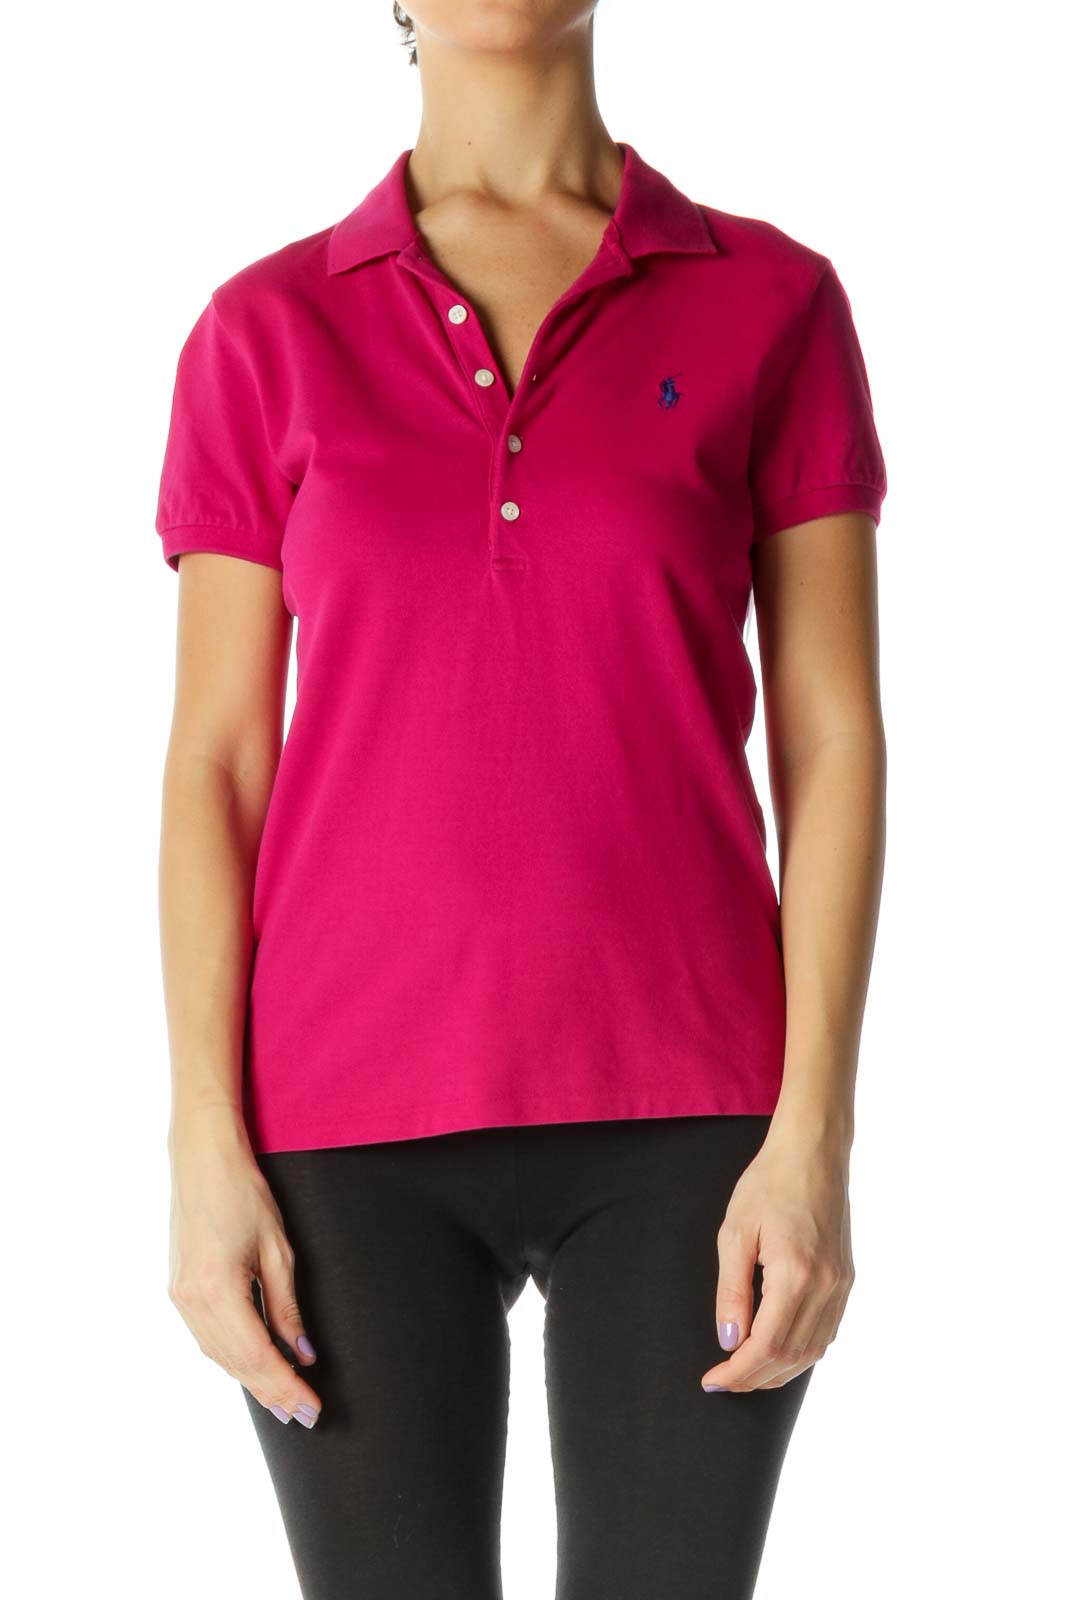 Red Solid Casual Polo Shirt Front